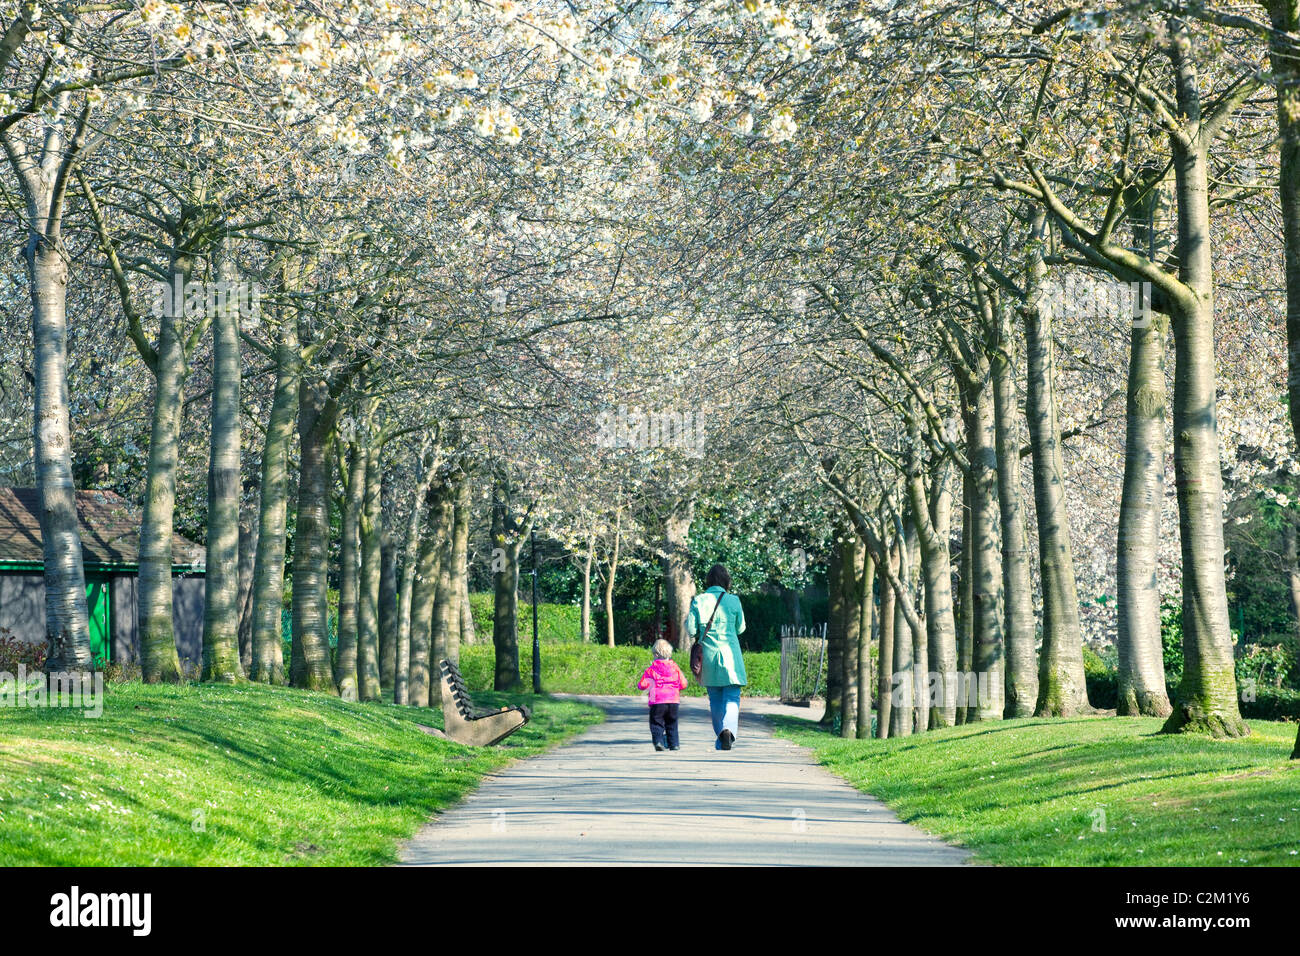 Woman and child walking through an avenue of blossom covered trees in Ashton Park, West Kirby, Wirral, England Stock Photo